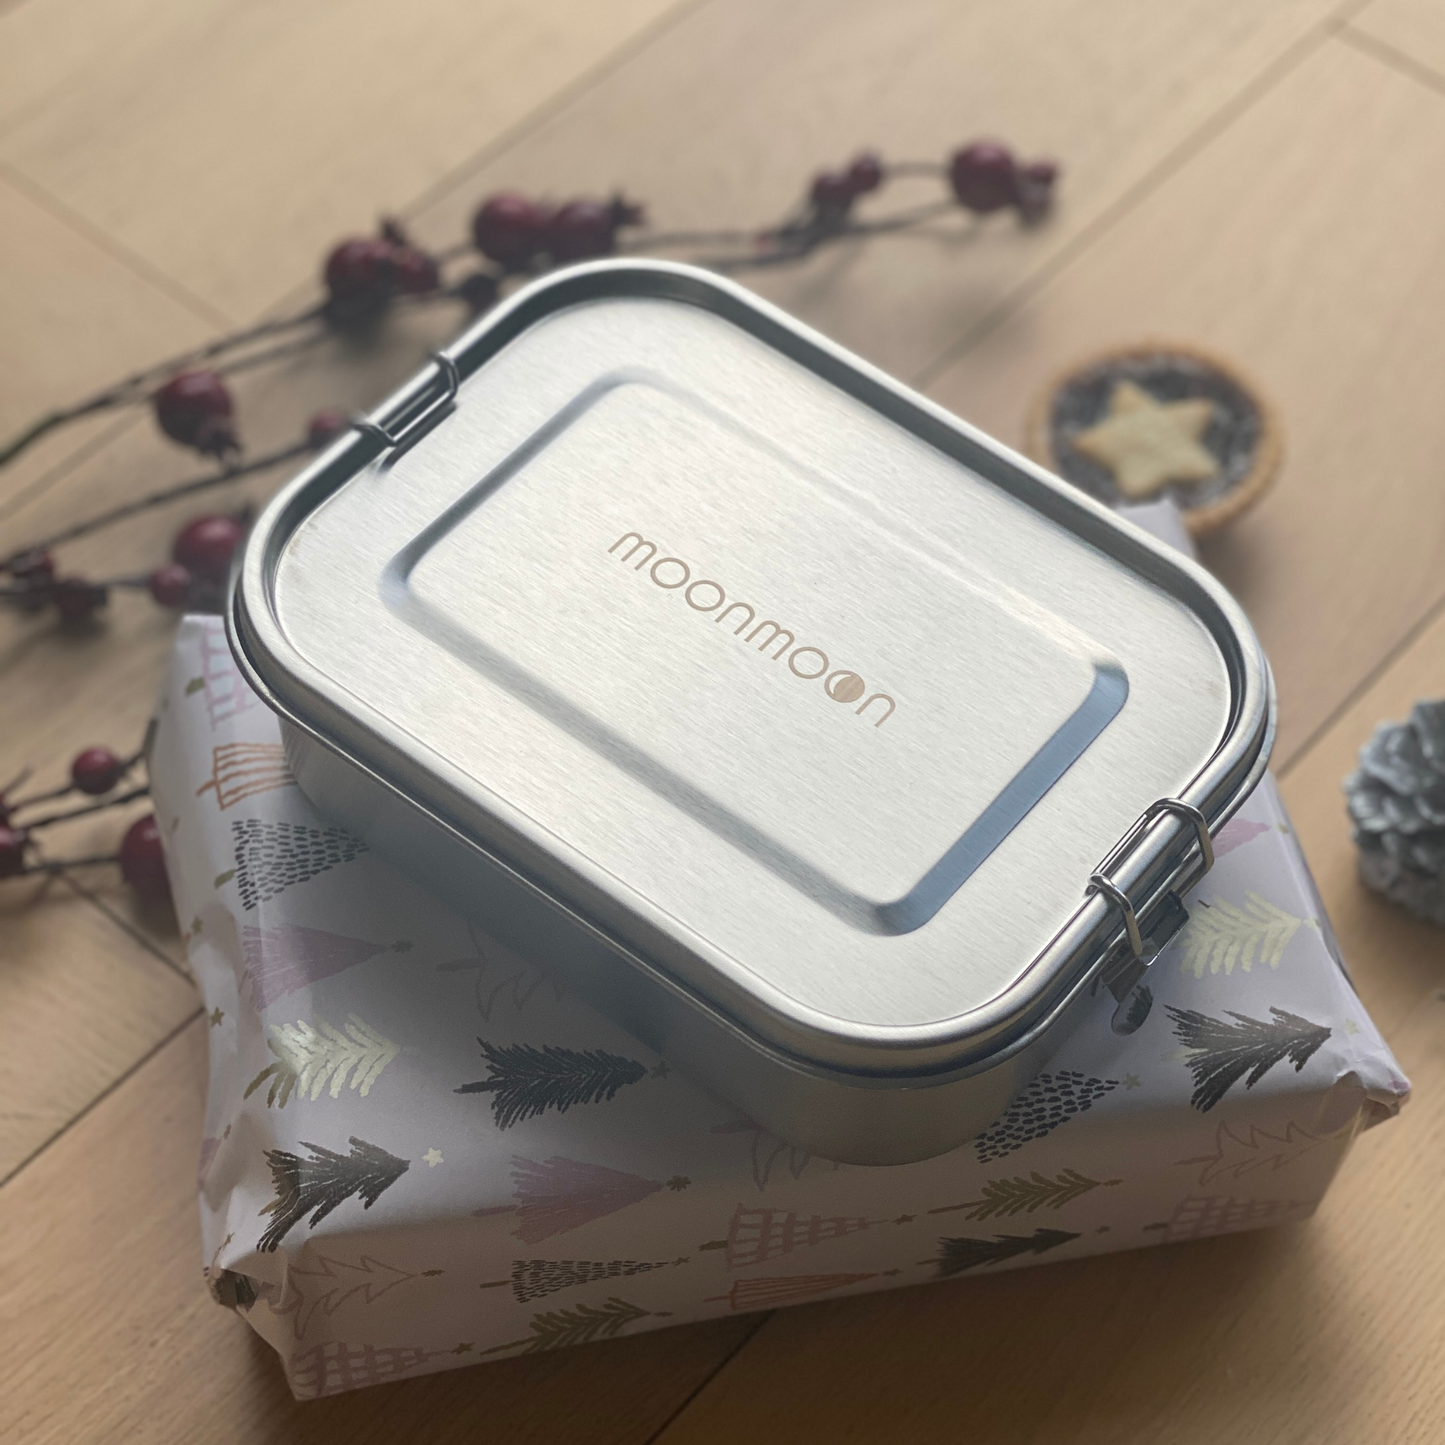 Moonmoon Stainless Steel Lunch Box, Metal Bento Box with Divider for Christmas